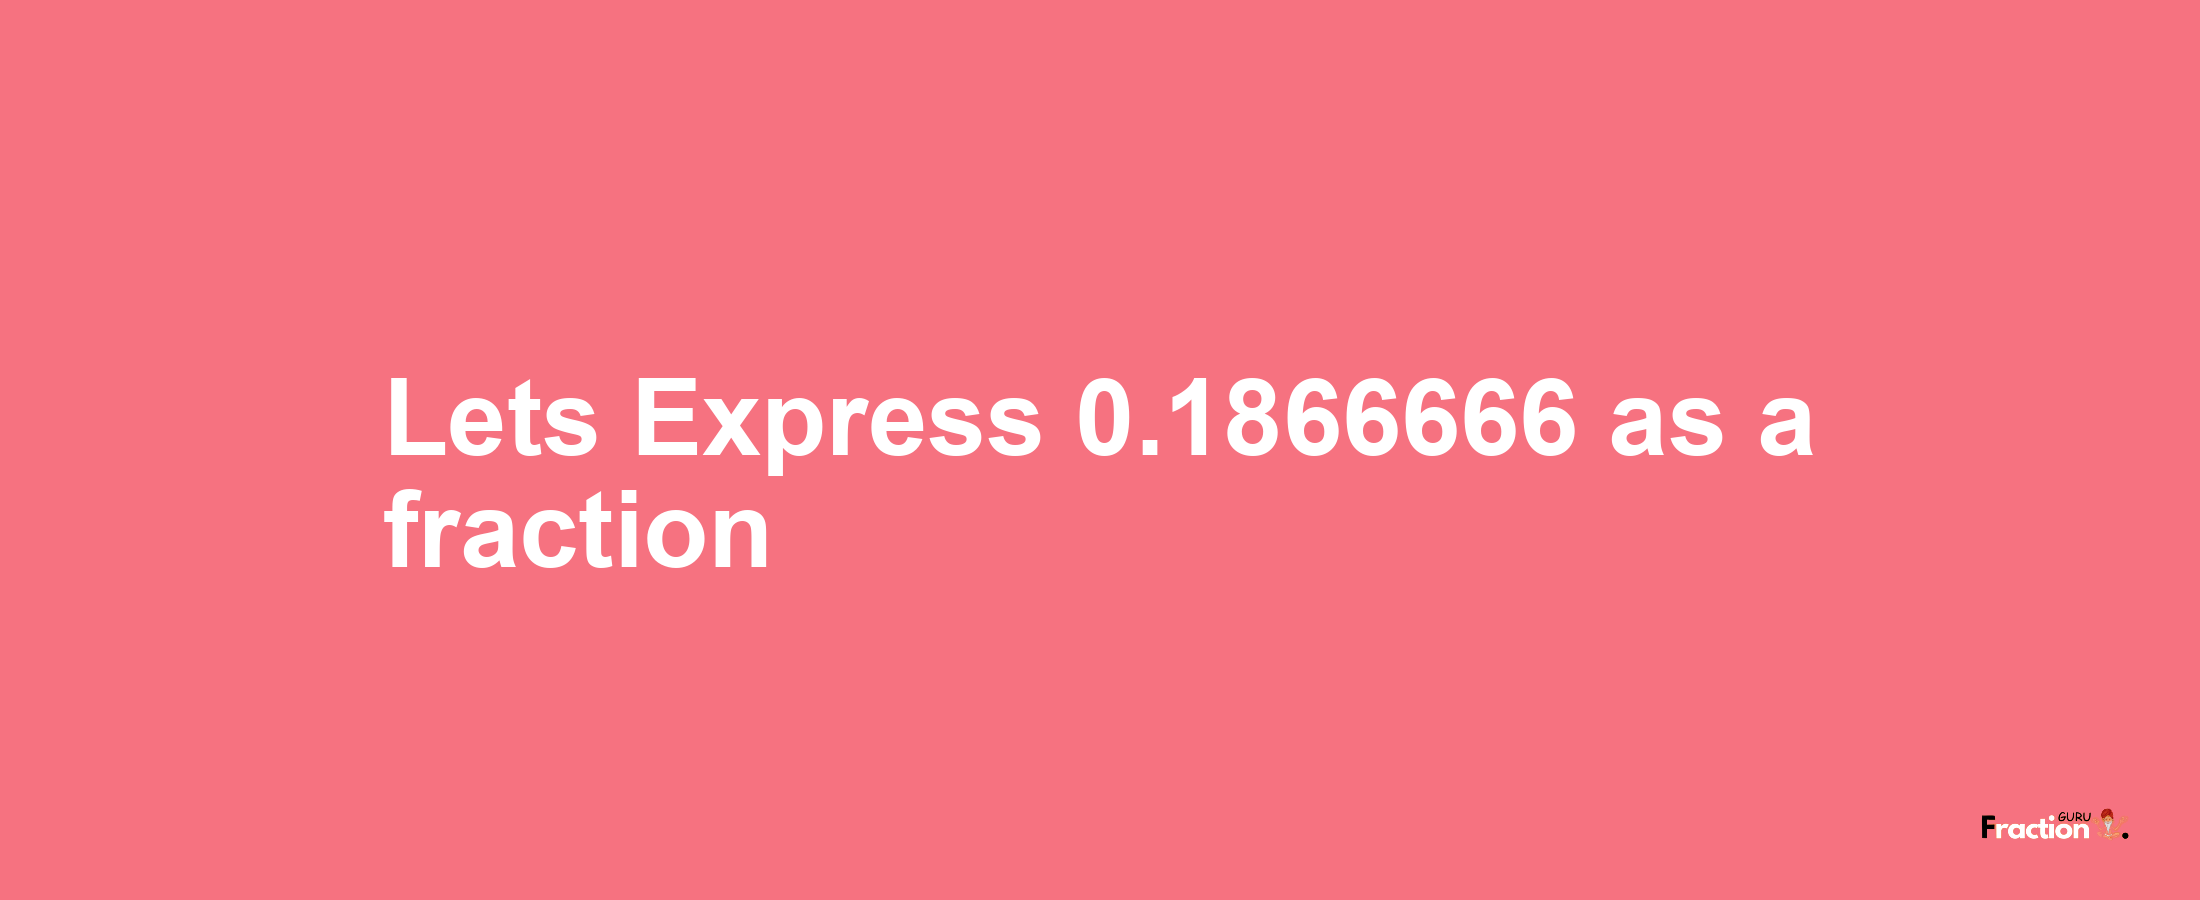 Lets Express 0.1866666 as afraction